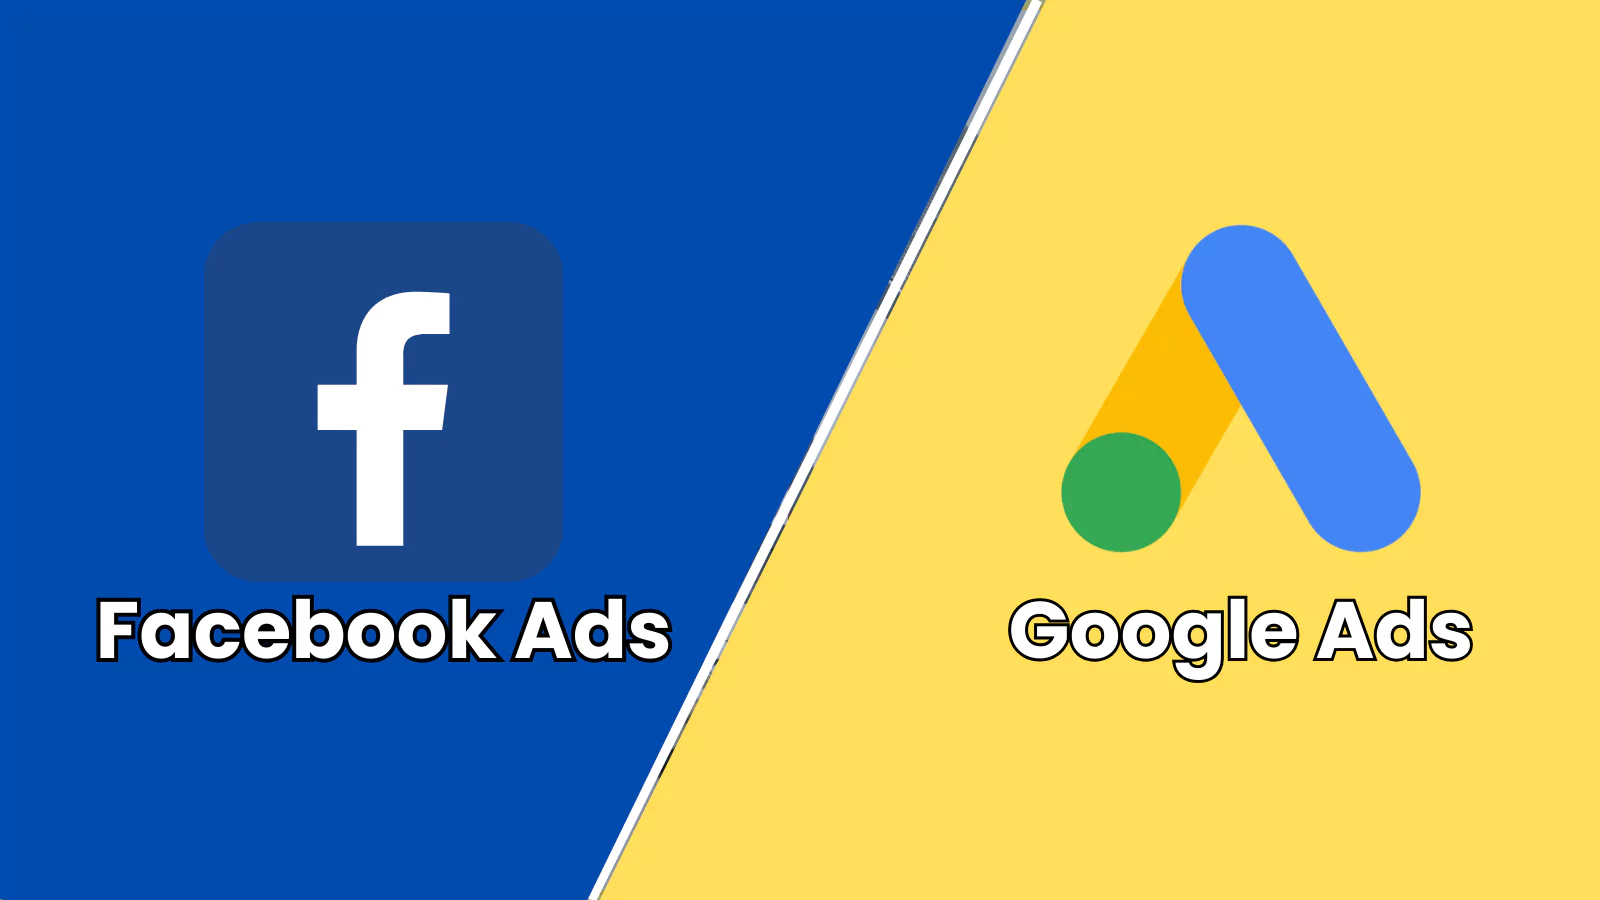 Facebook Ads and Google Ads For Real Estate Business